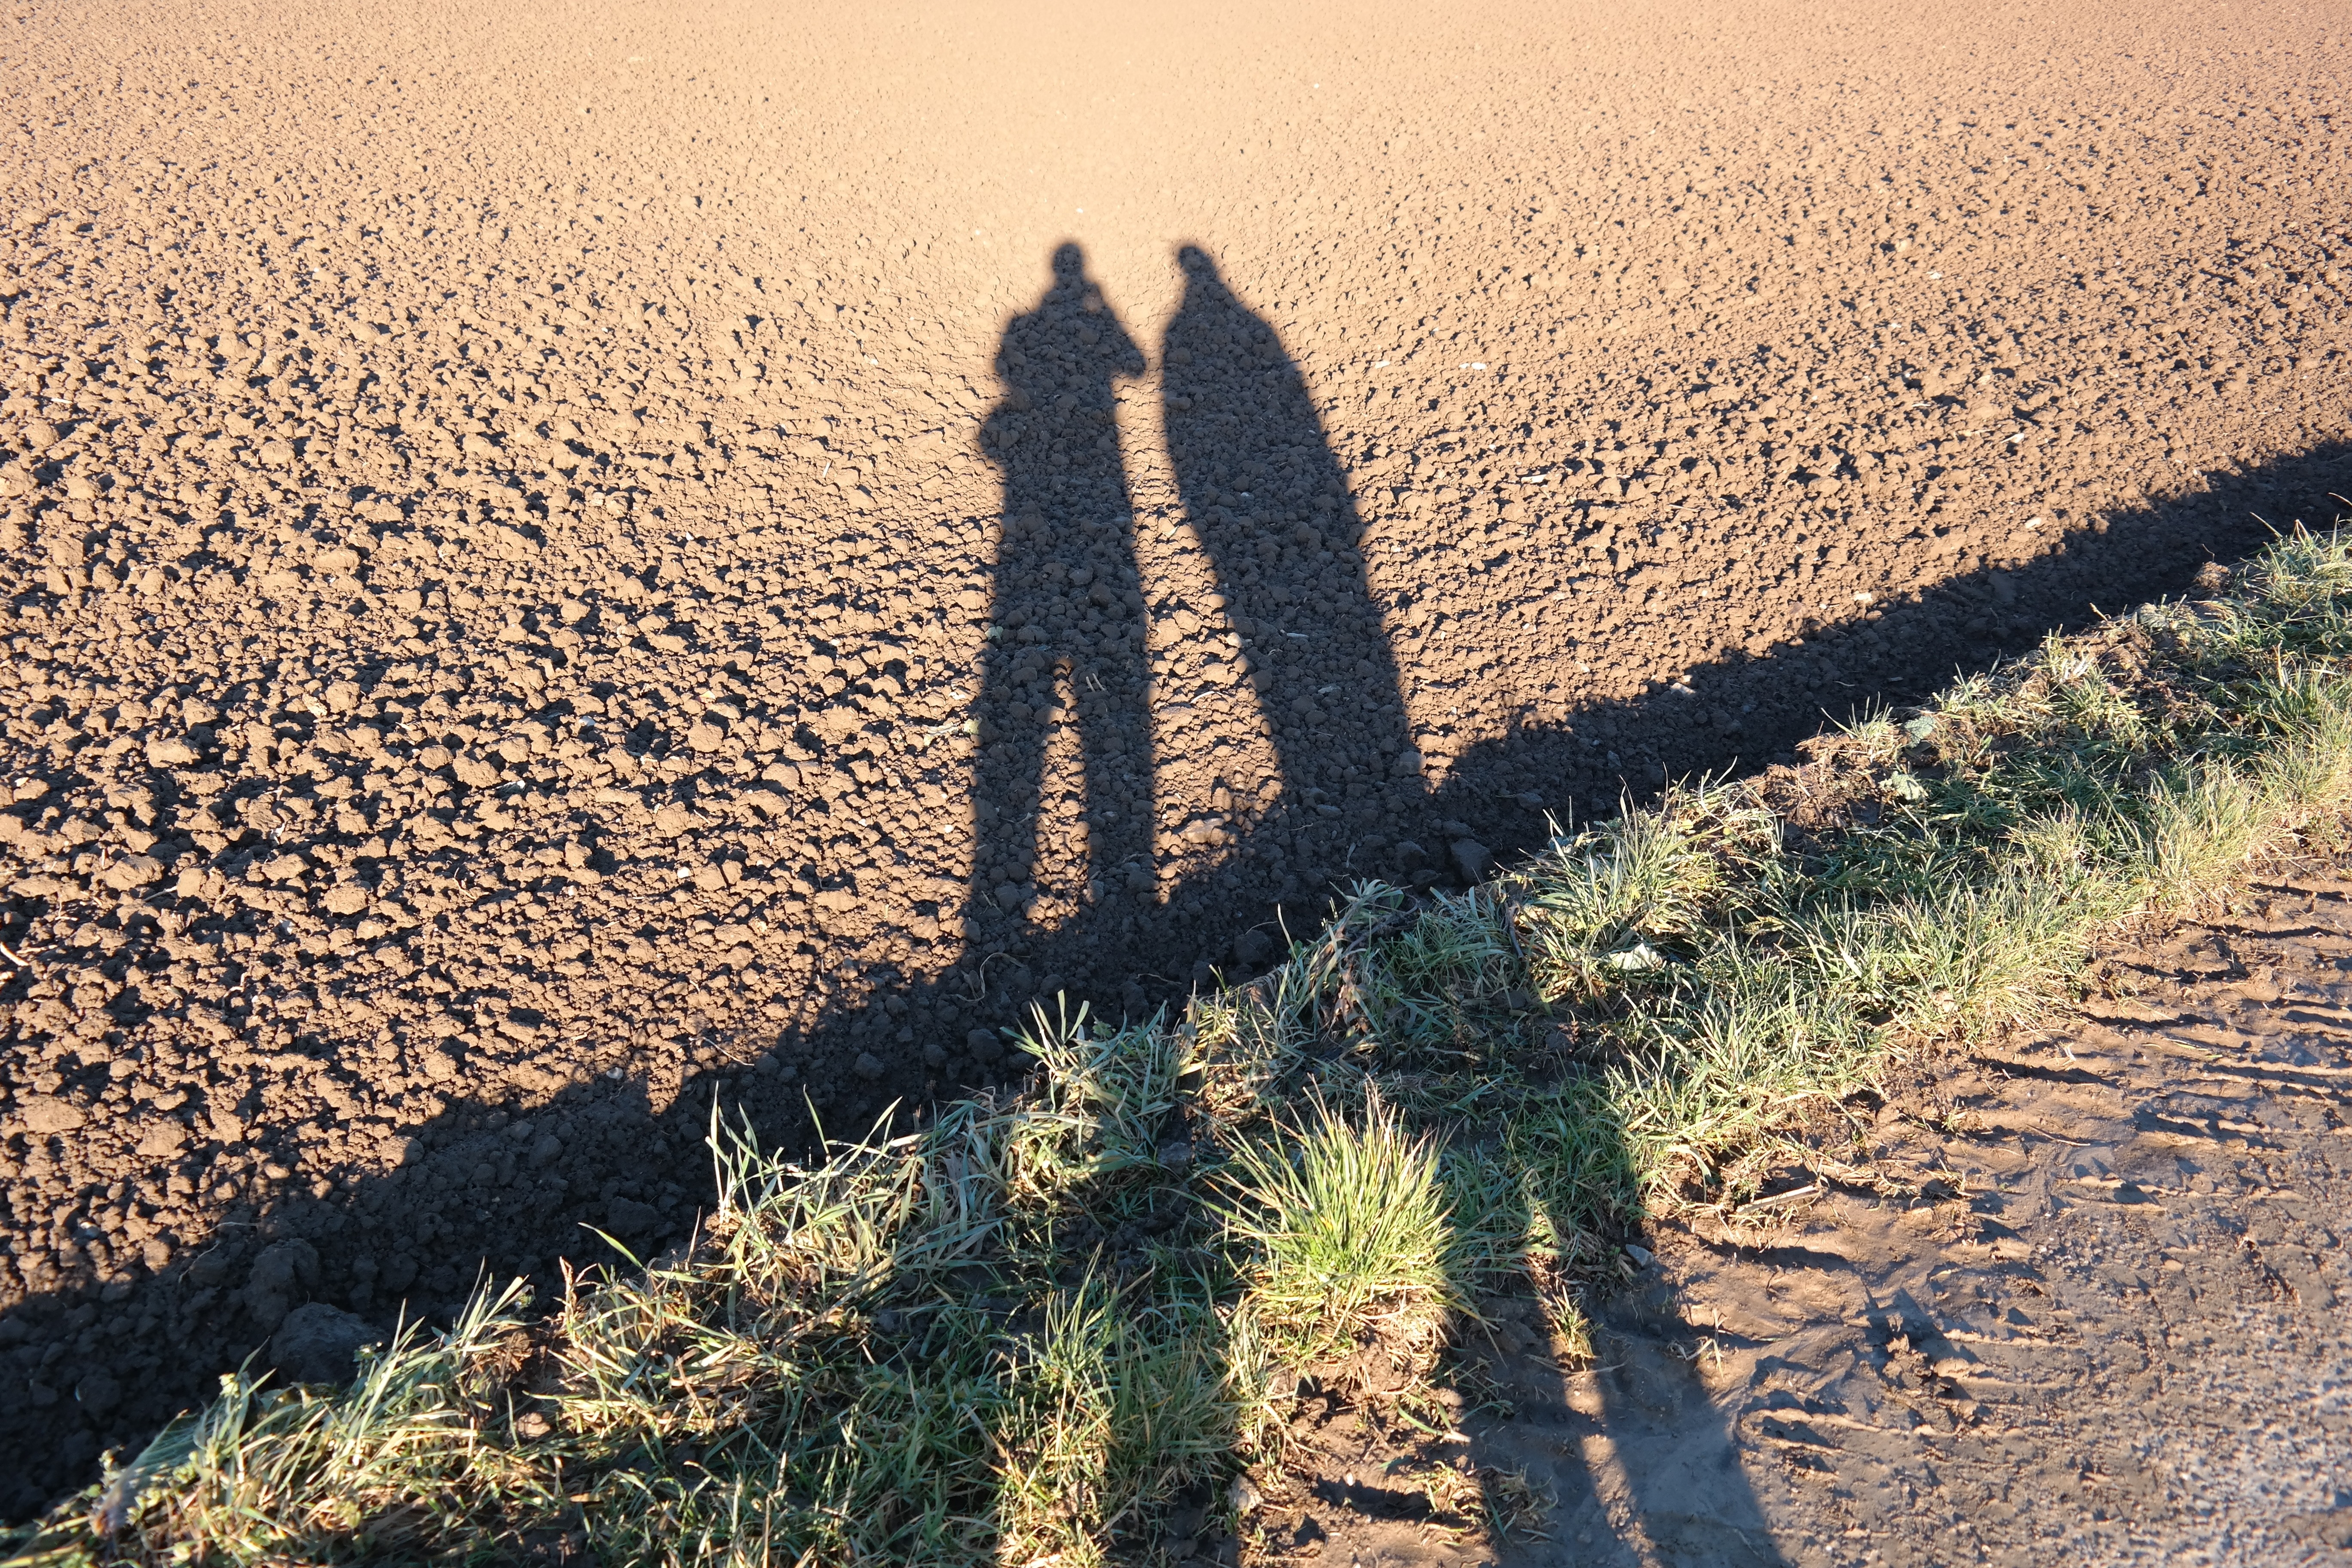 two shadows of two person standing side by side during day